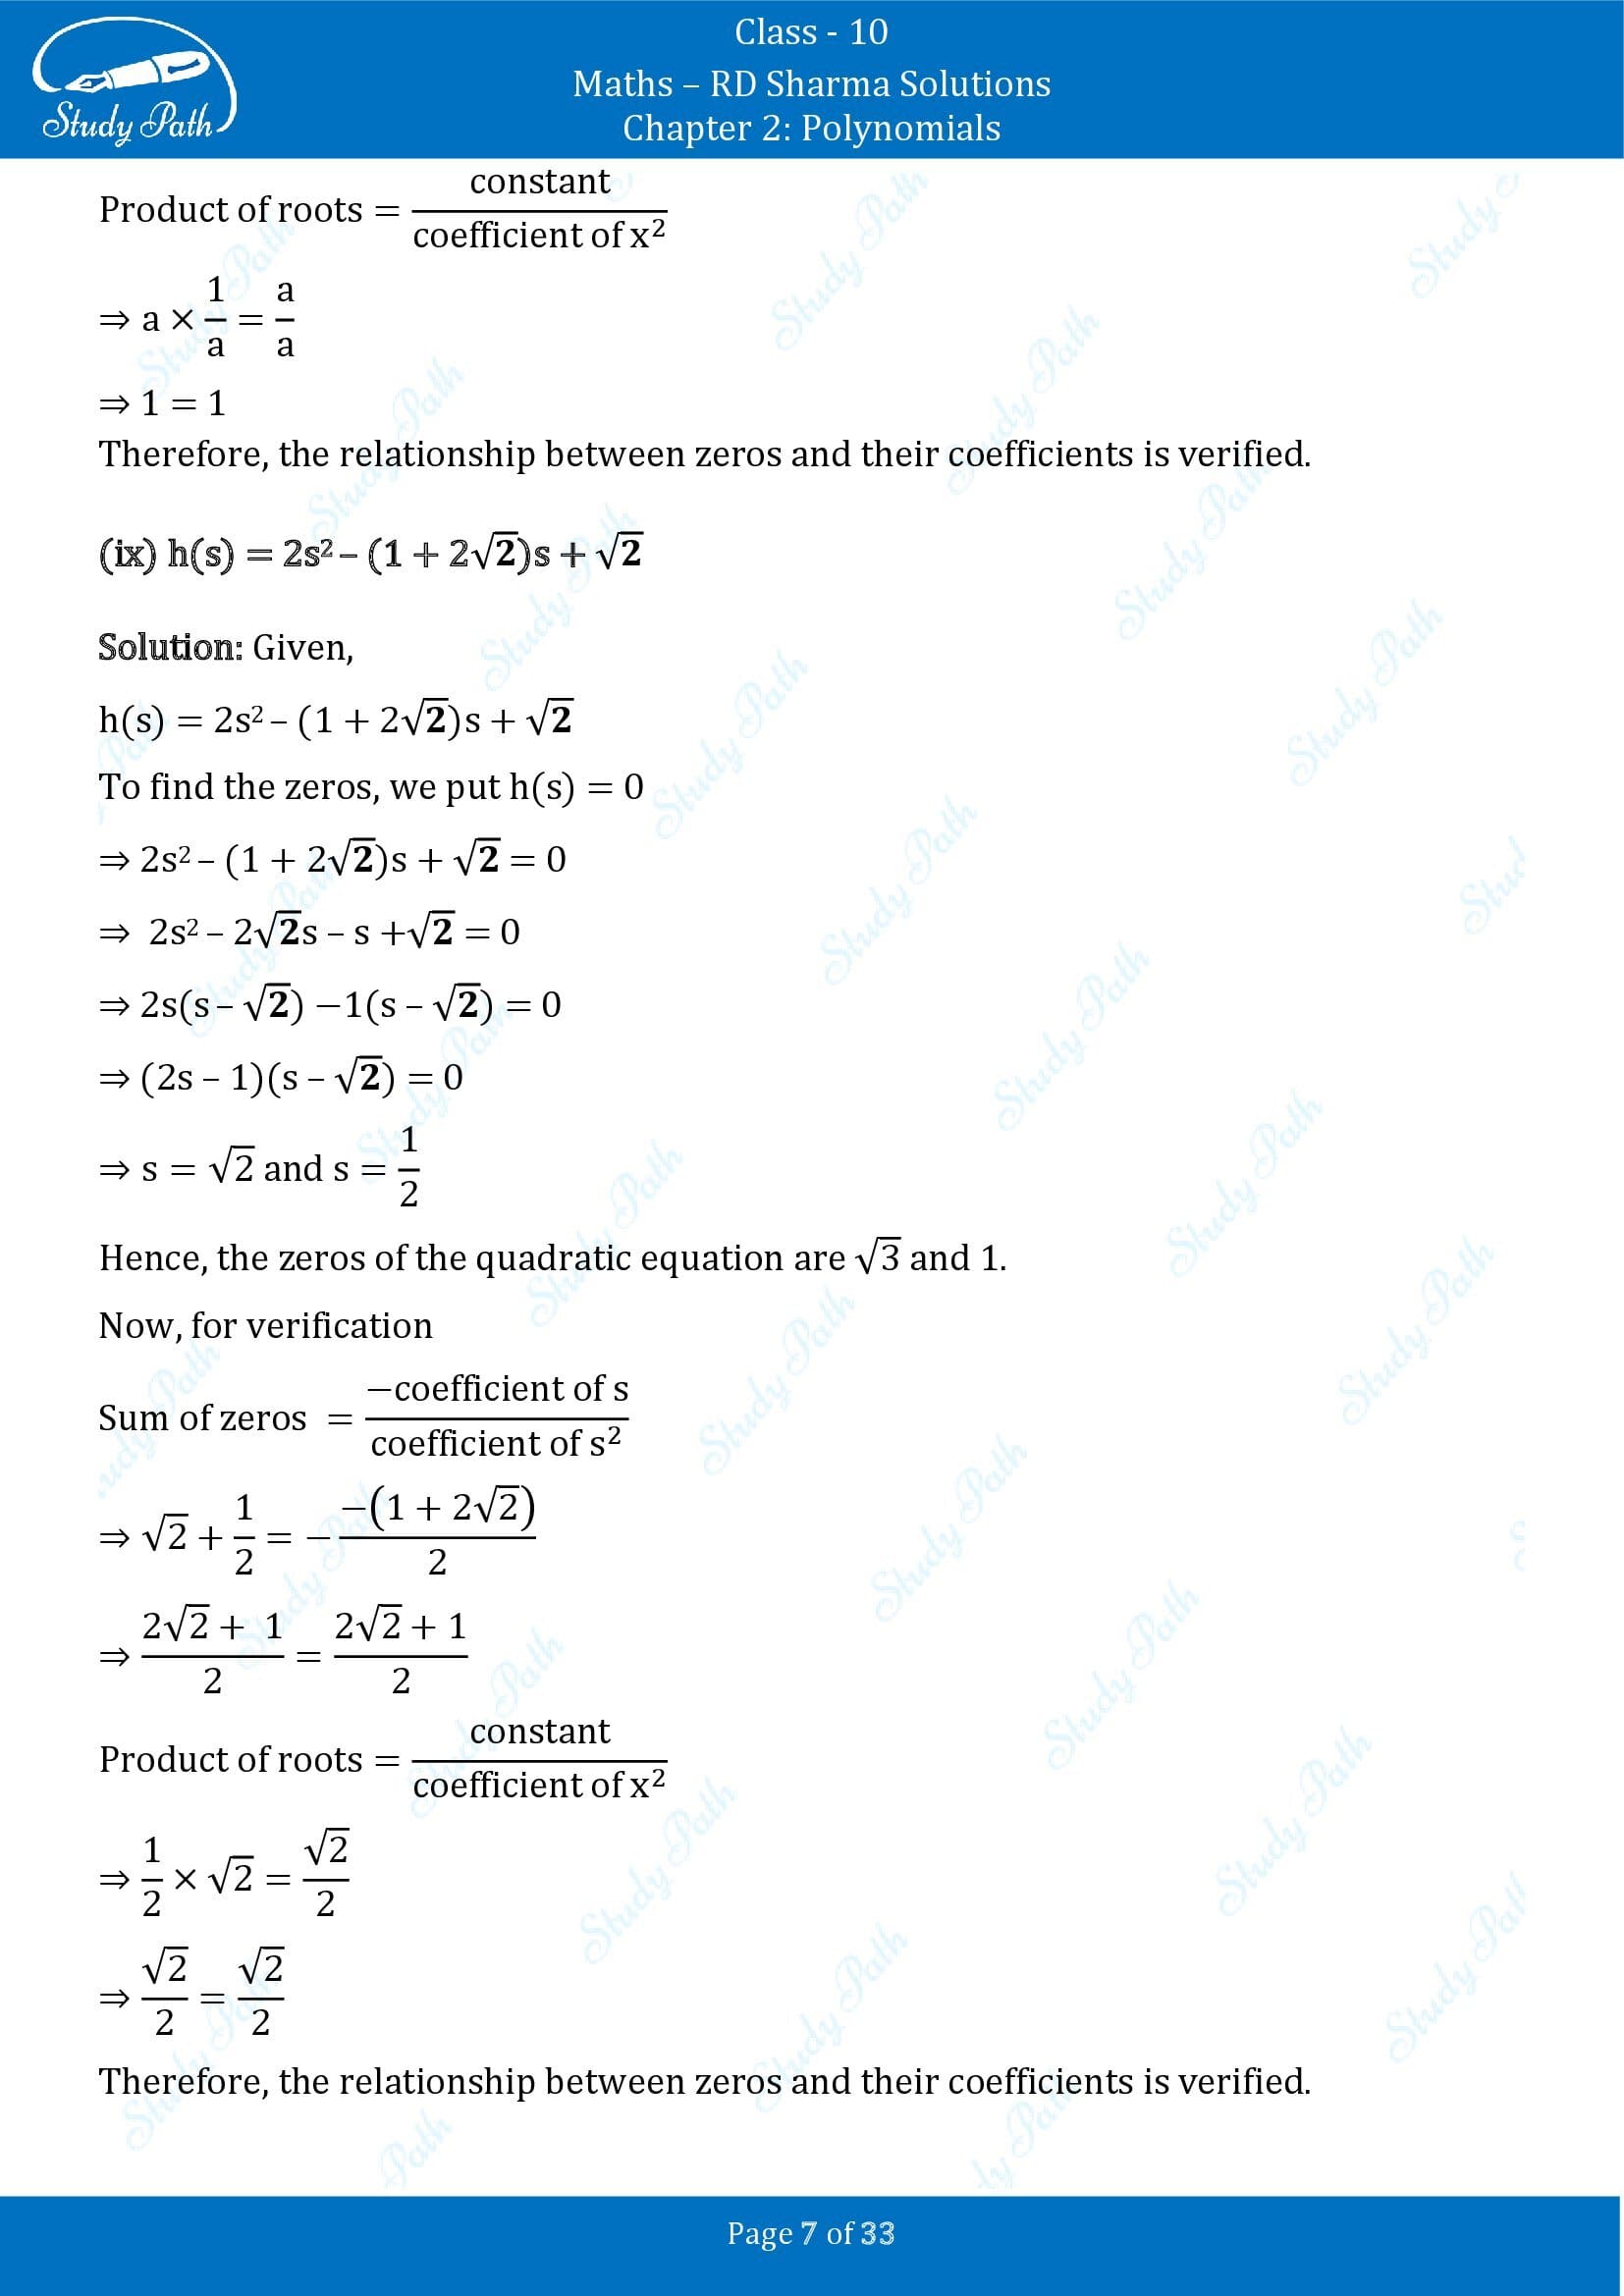 RD Sharma Solutions Class 10 Chapter 2 Polynomials Exercise 2.1 00007